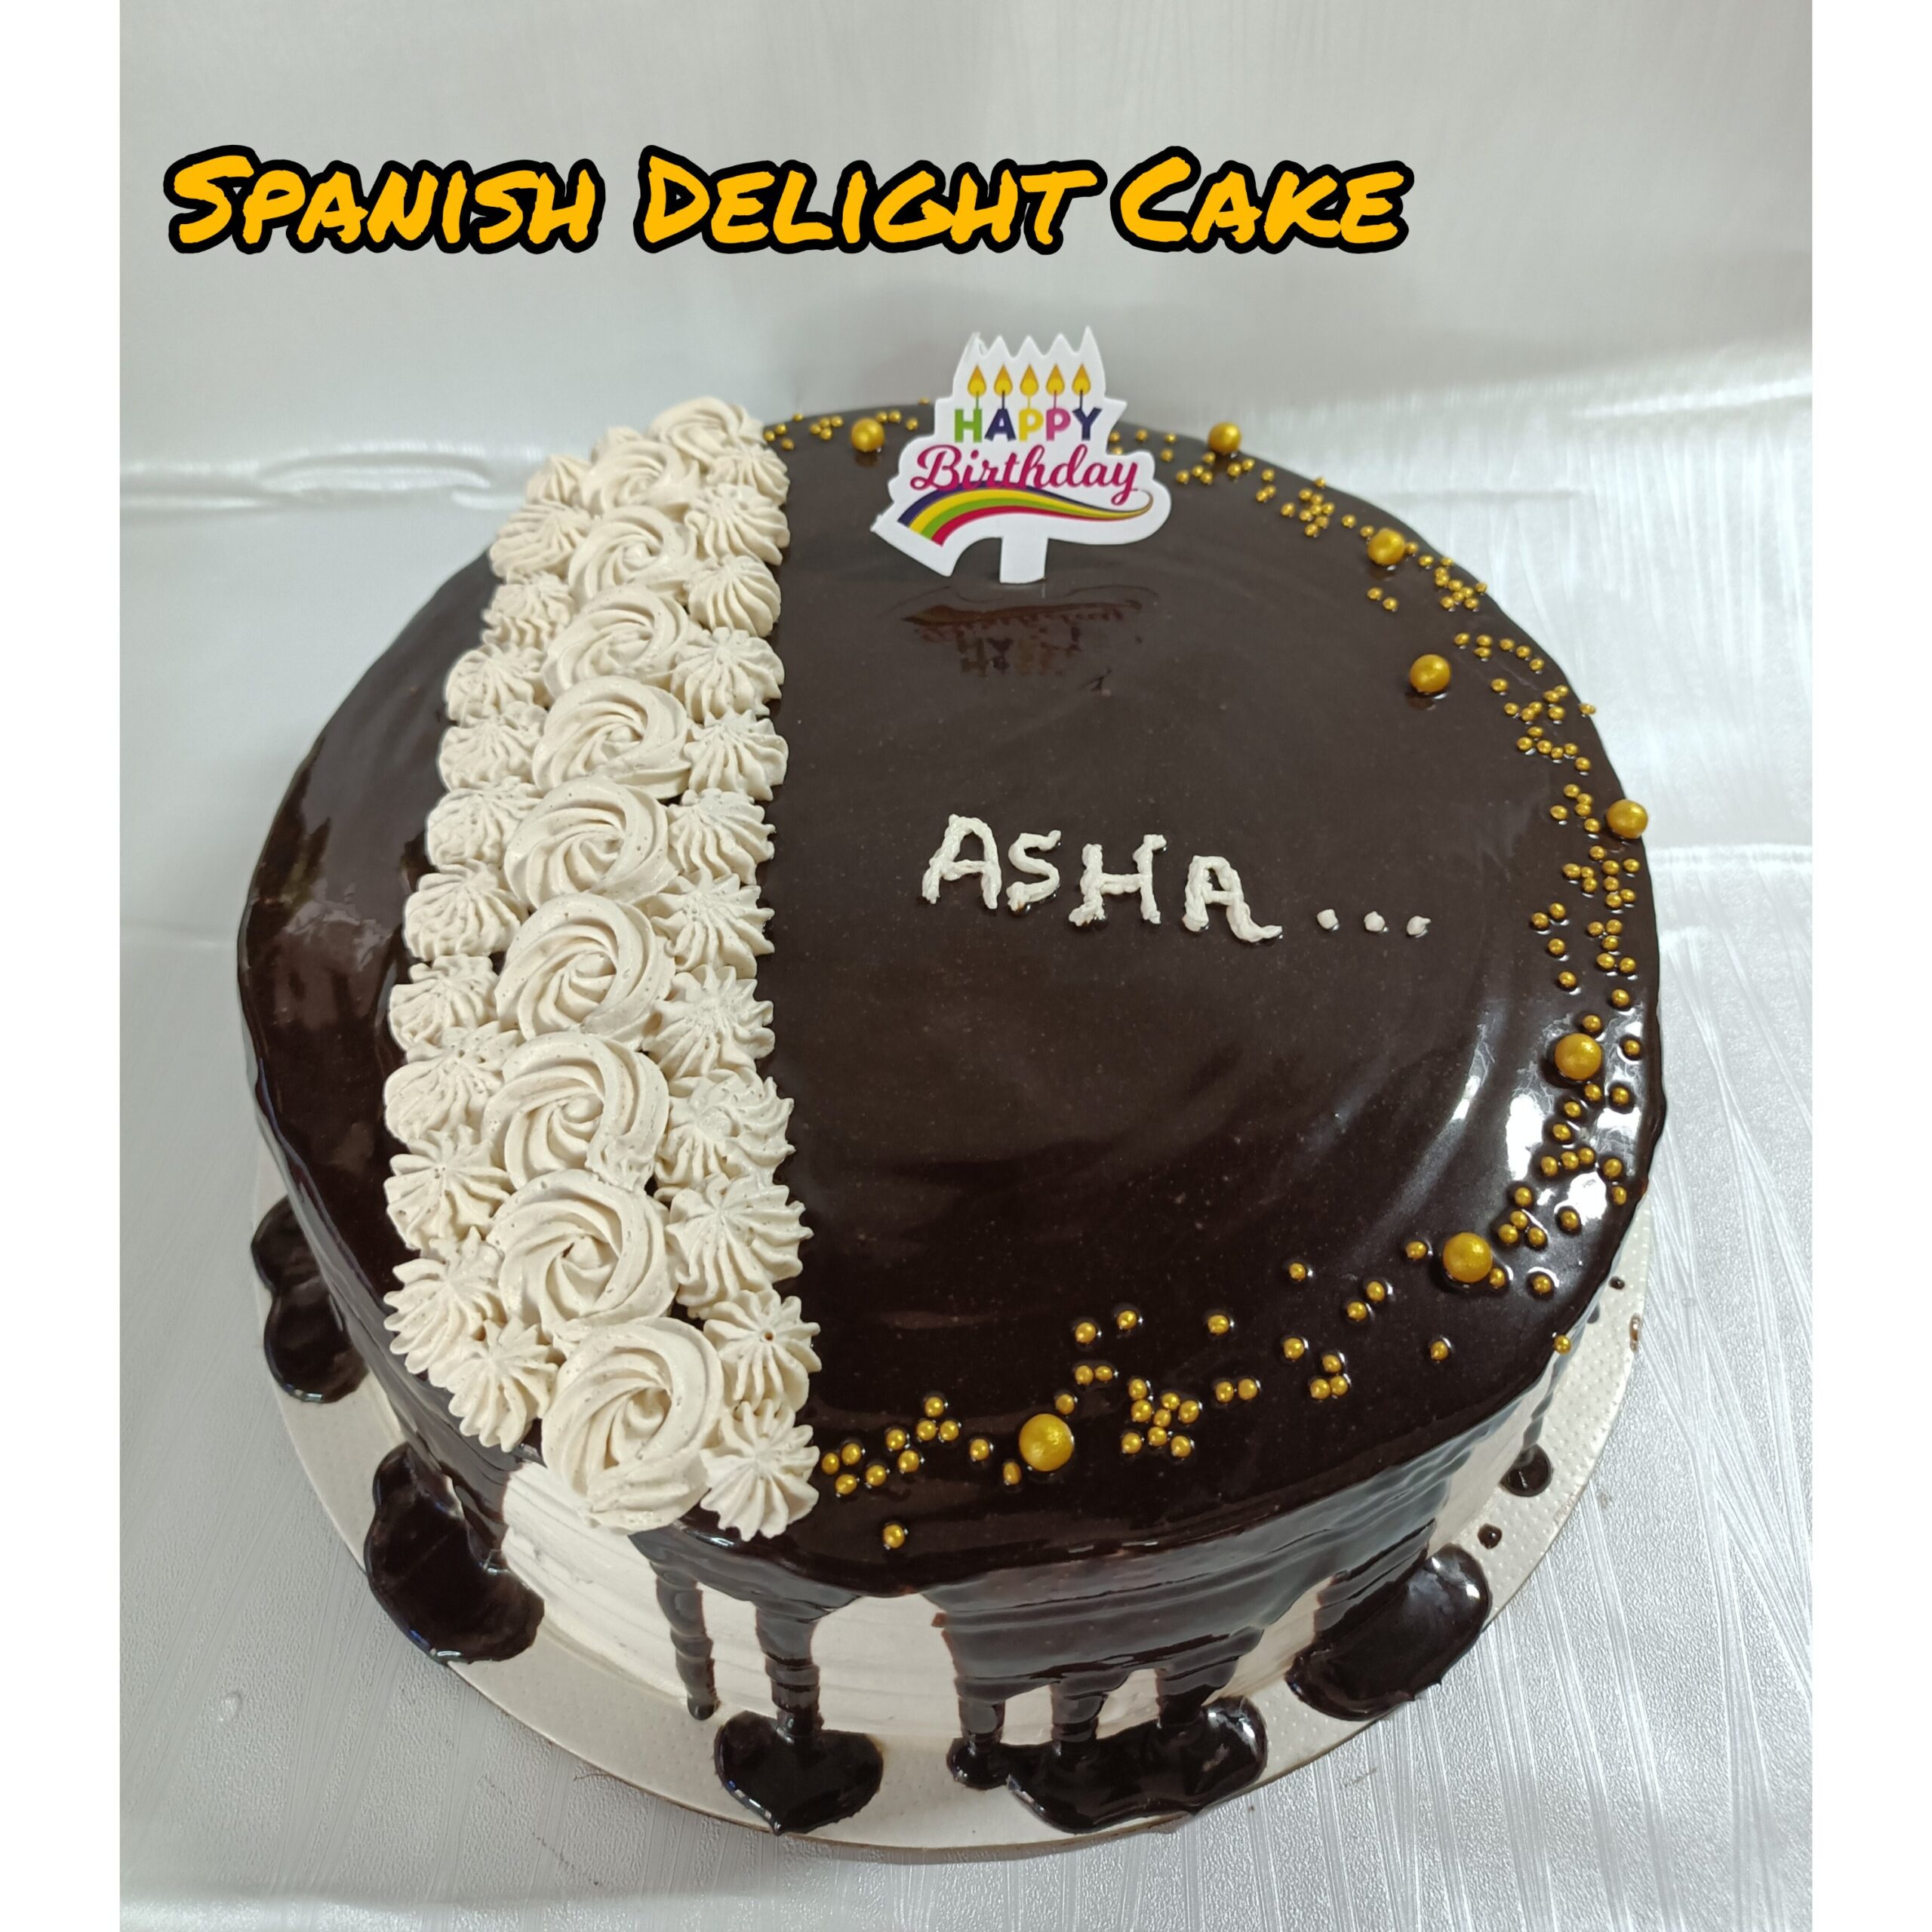 German Black Forest Half Kg Cake by CakeSquare |Send Cakes to Chennai |  Order Online Now - Cake Square Chennai | Cake Shop in Chennai